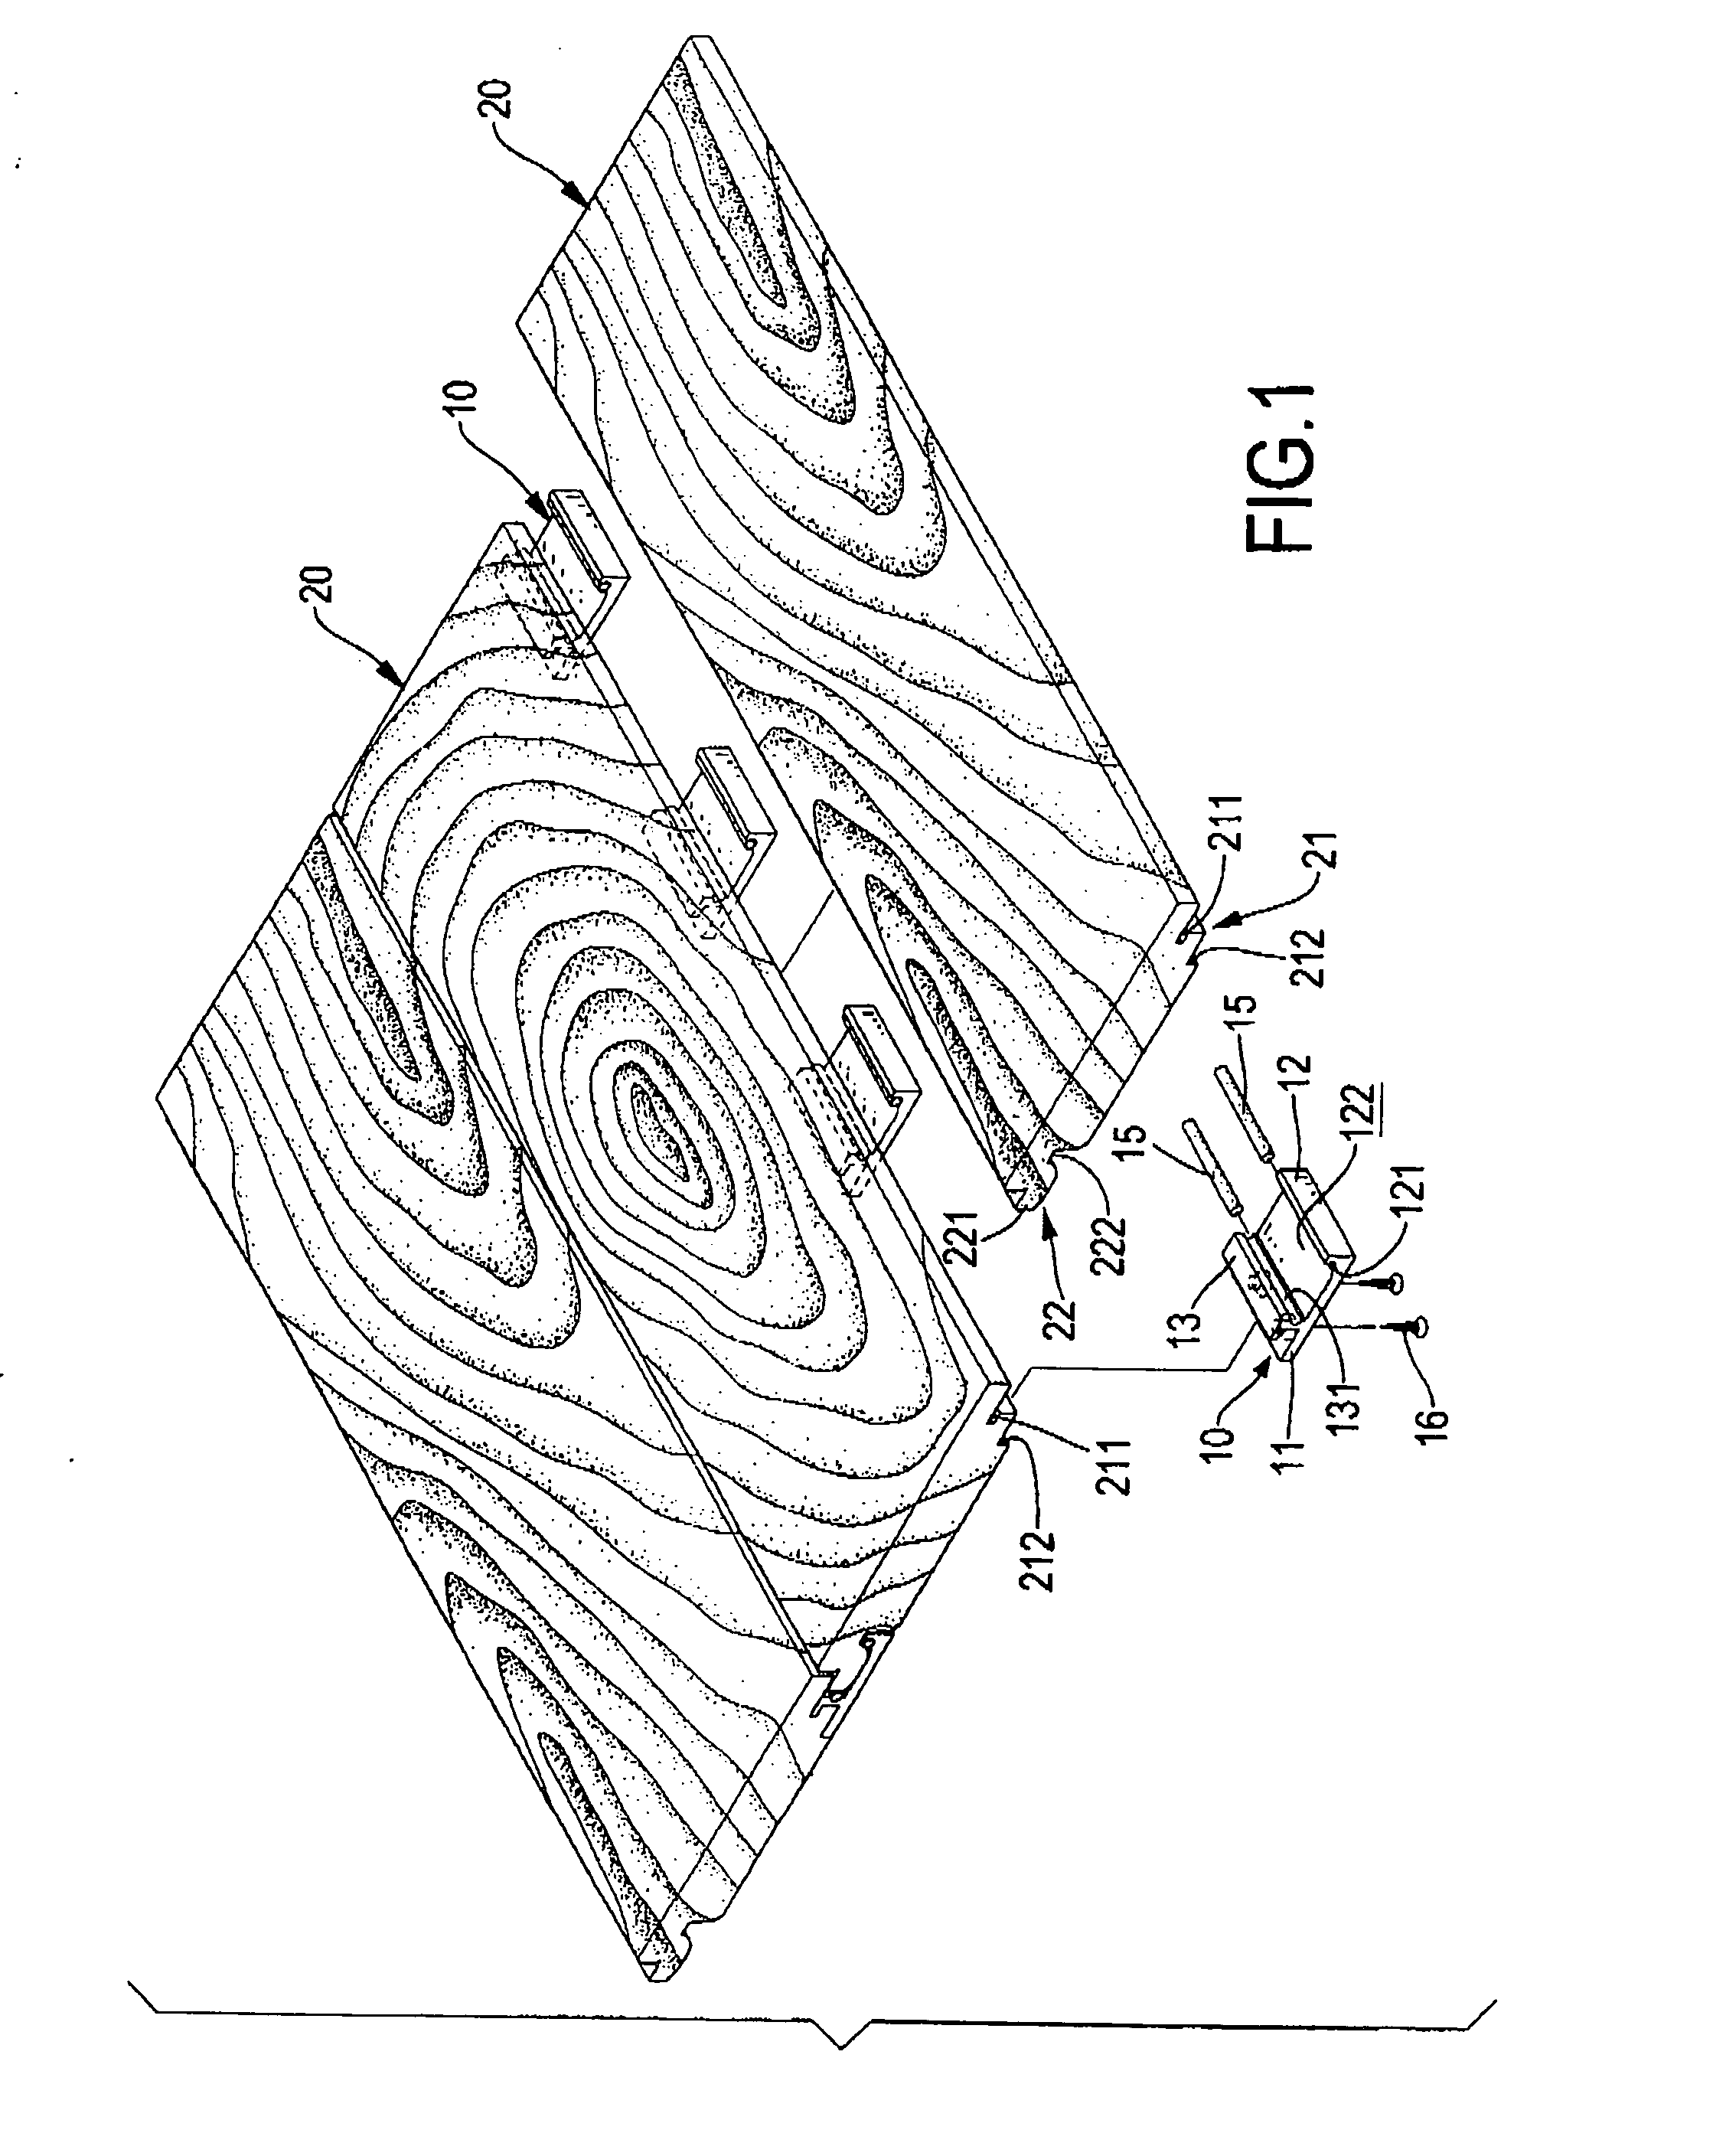 Securing device for combining floor plates